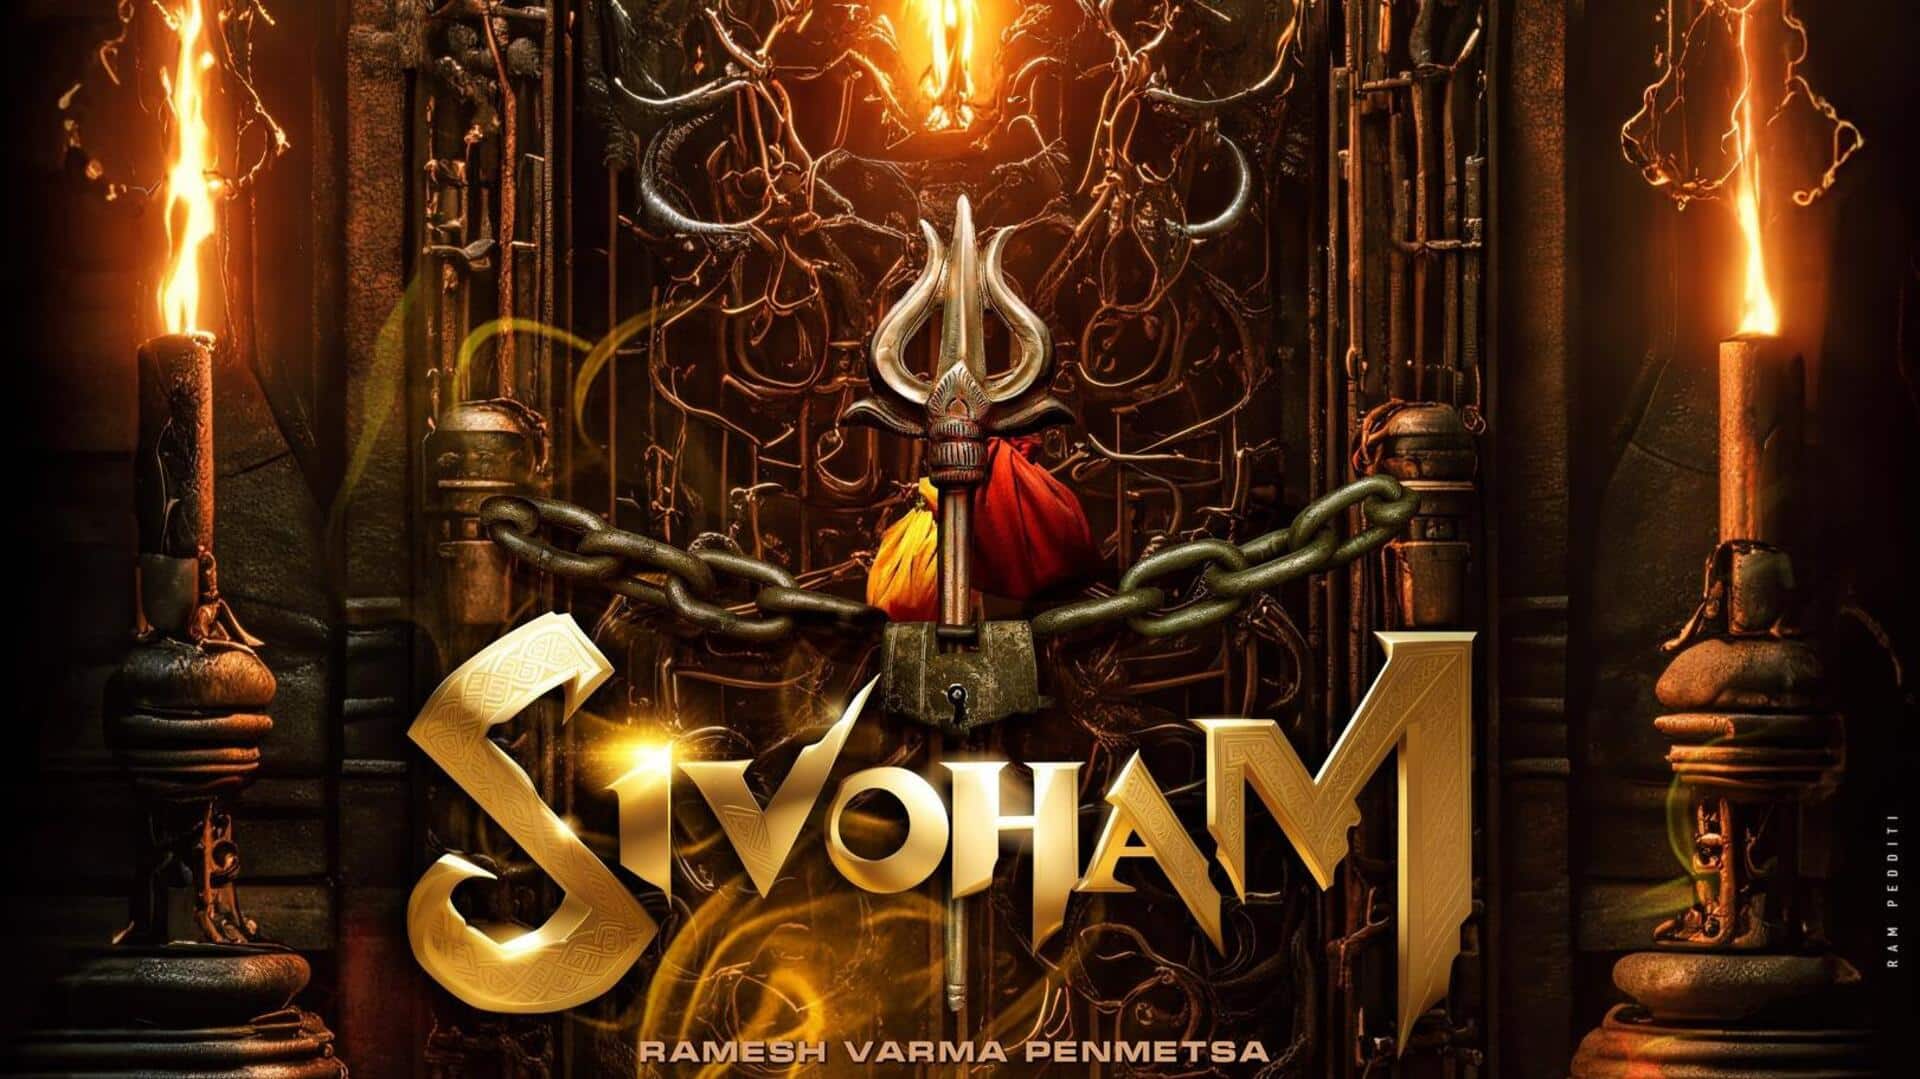 Ramesh Varma's next directorial 'Sivoham's concept poster is out